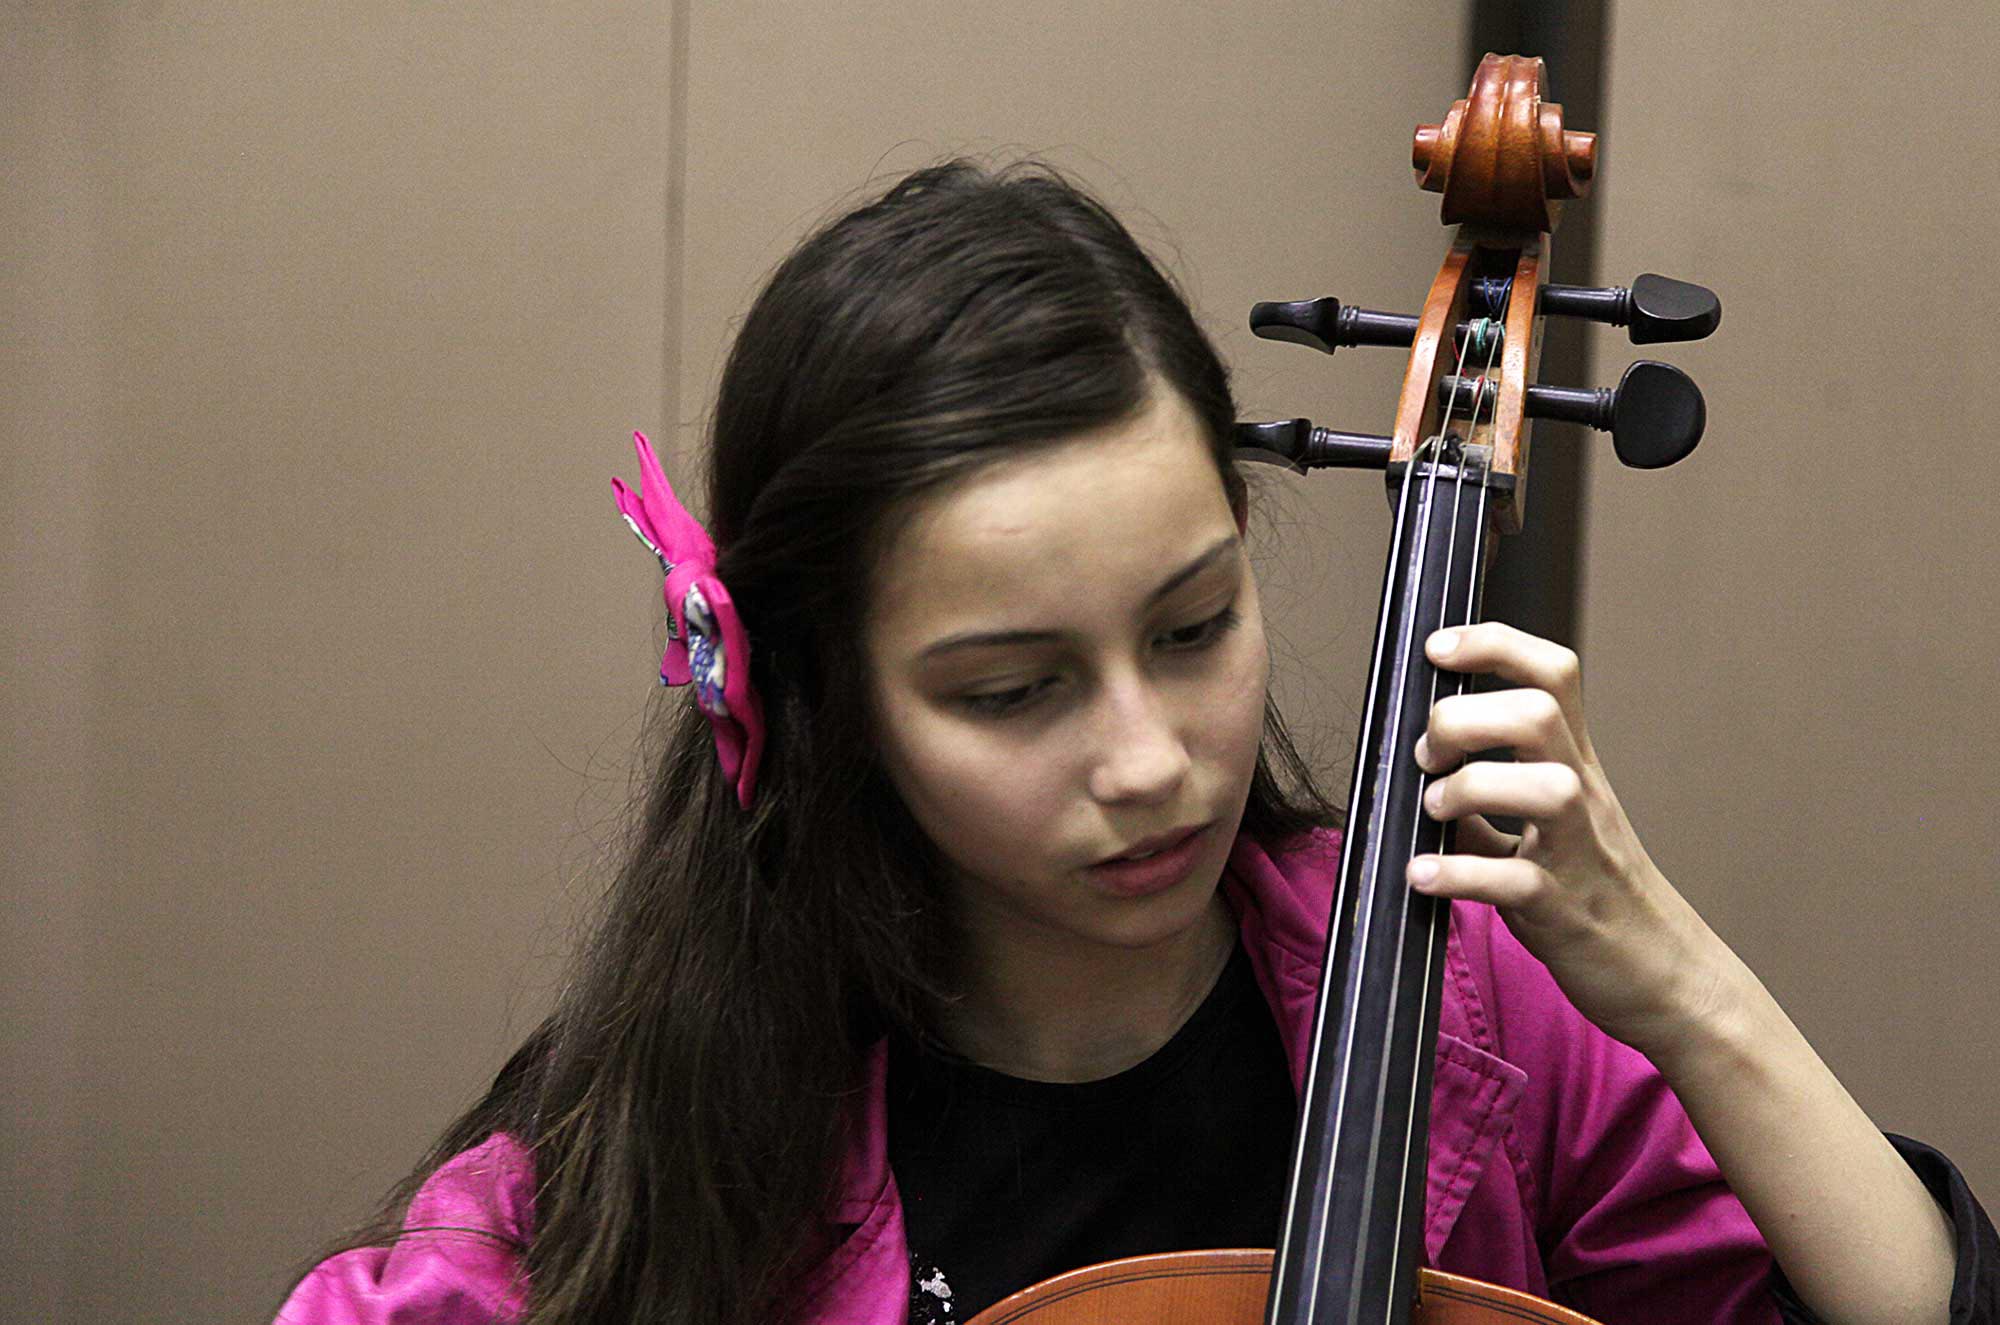 Learning an instrument takes a lot of determination. Students at the Gaza Music School have what it takes.